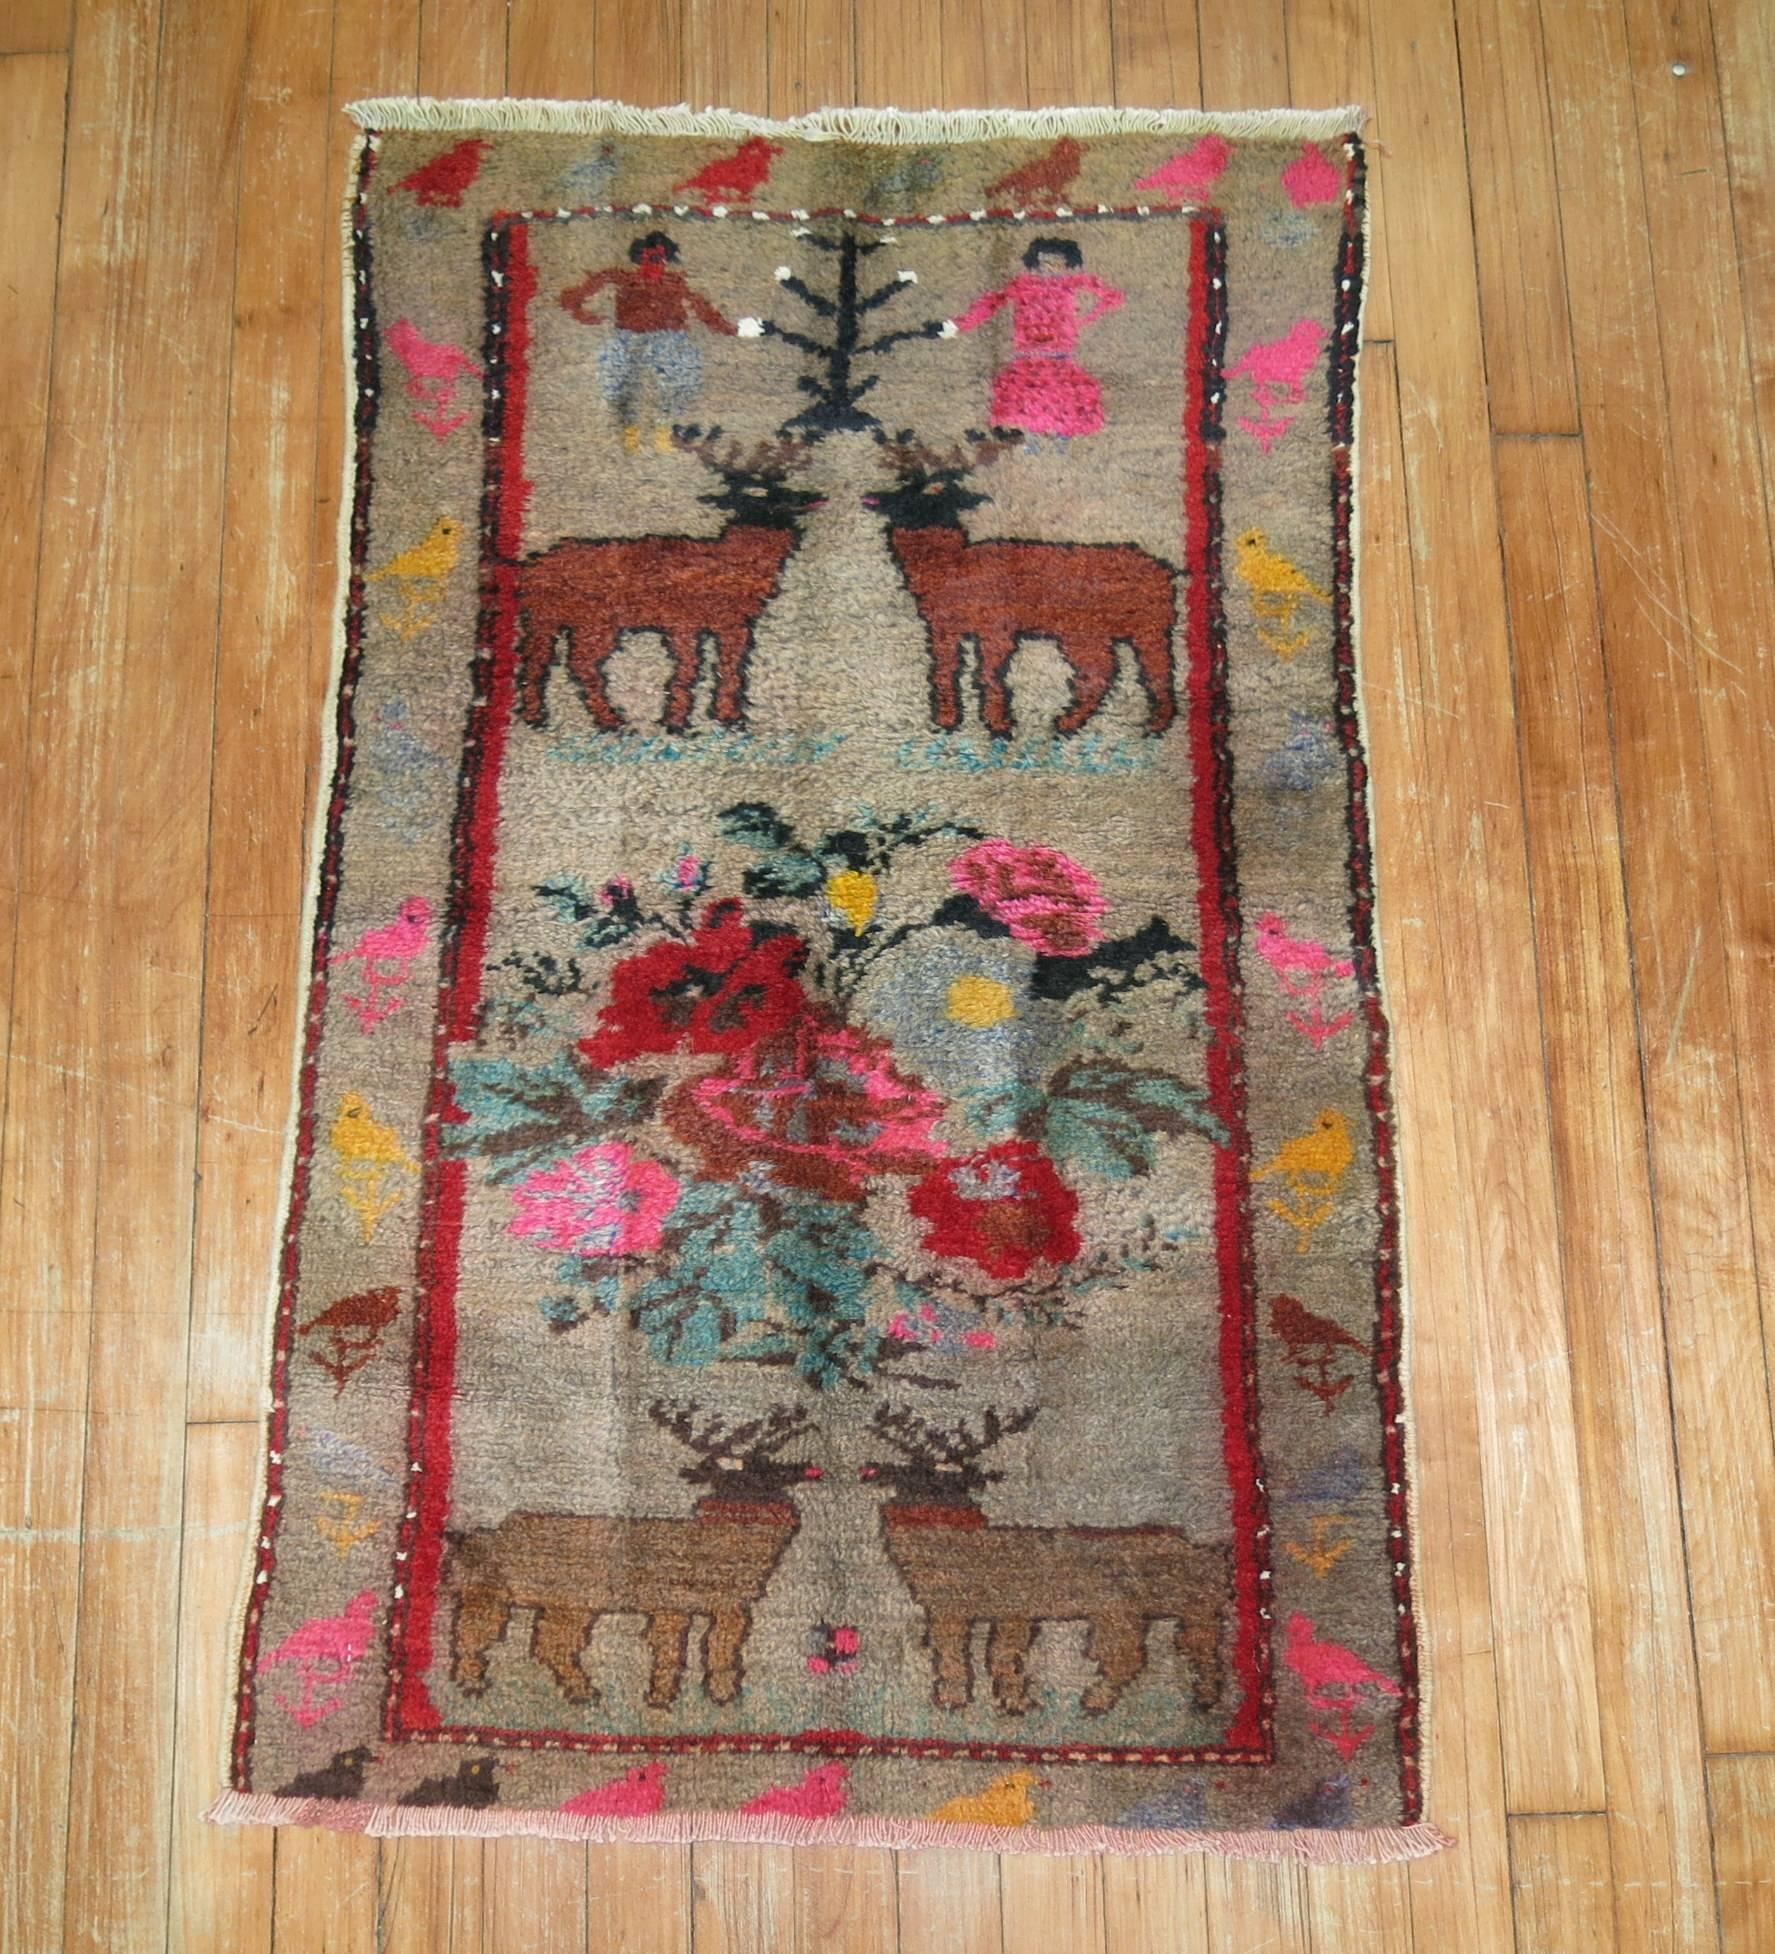 Eclectic Vintage Turkish Pictorial rug from the middle part of the 20th century.

2'2'' x 3'6''